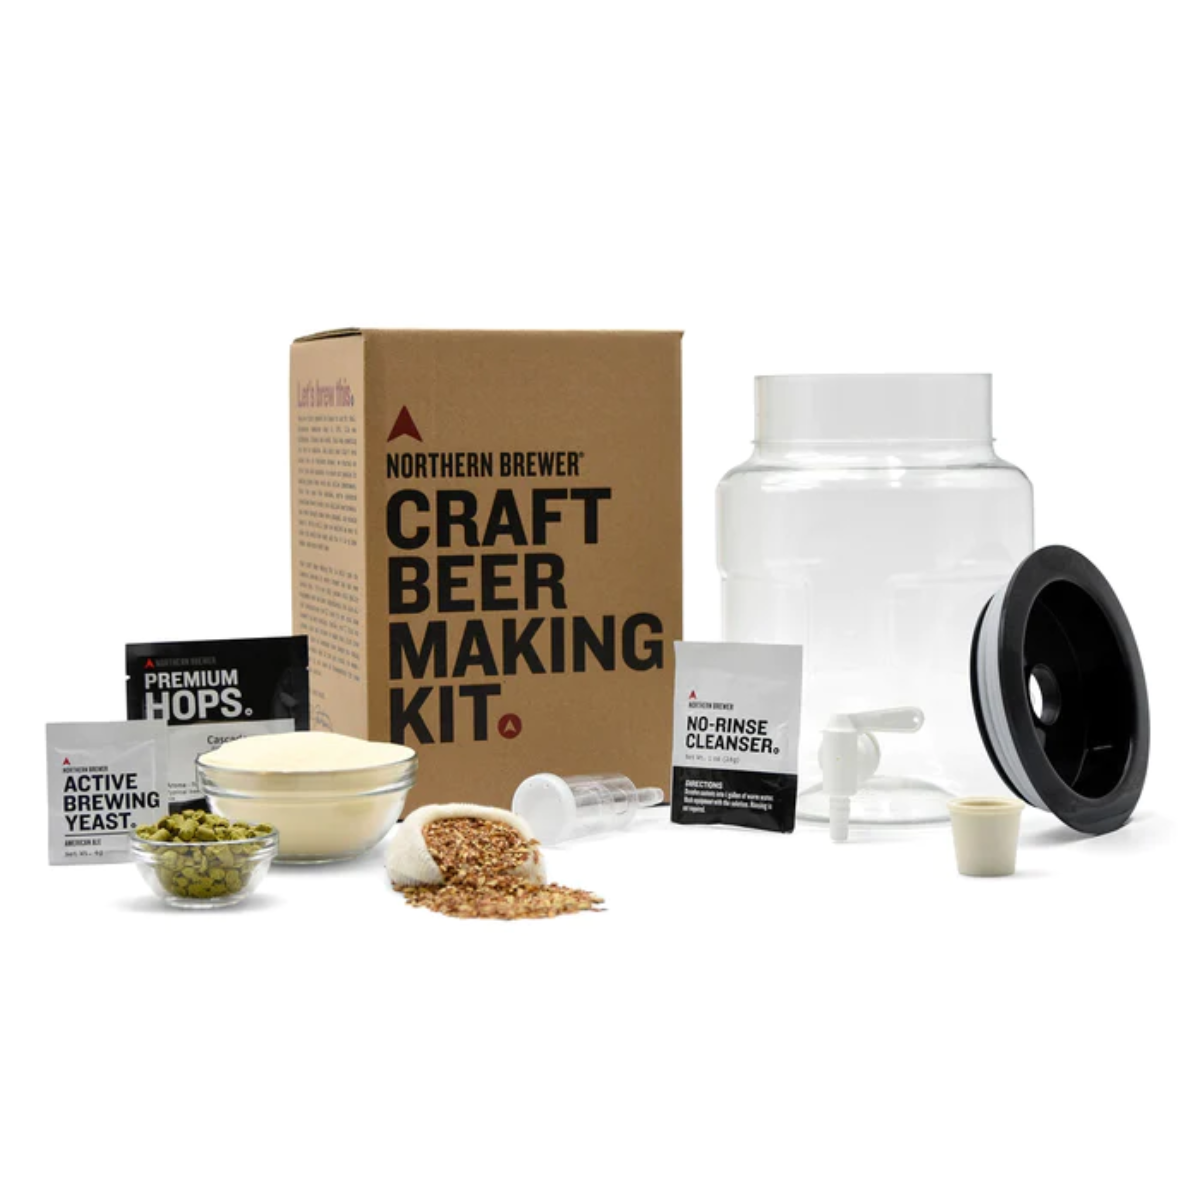 34. Craft Beer Making Kit: The Unique and Thoughtful 2nd Year Anniversary Gift for Him